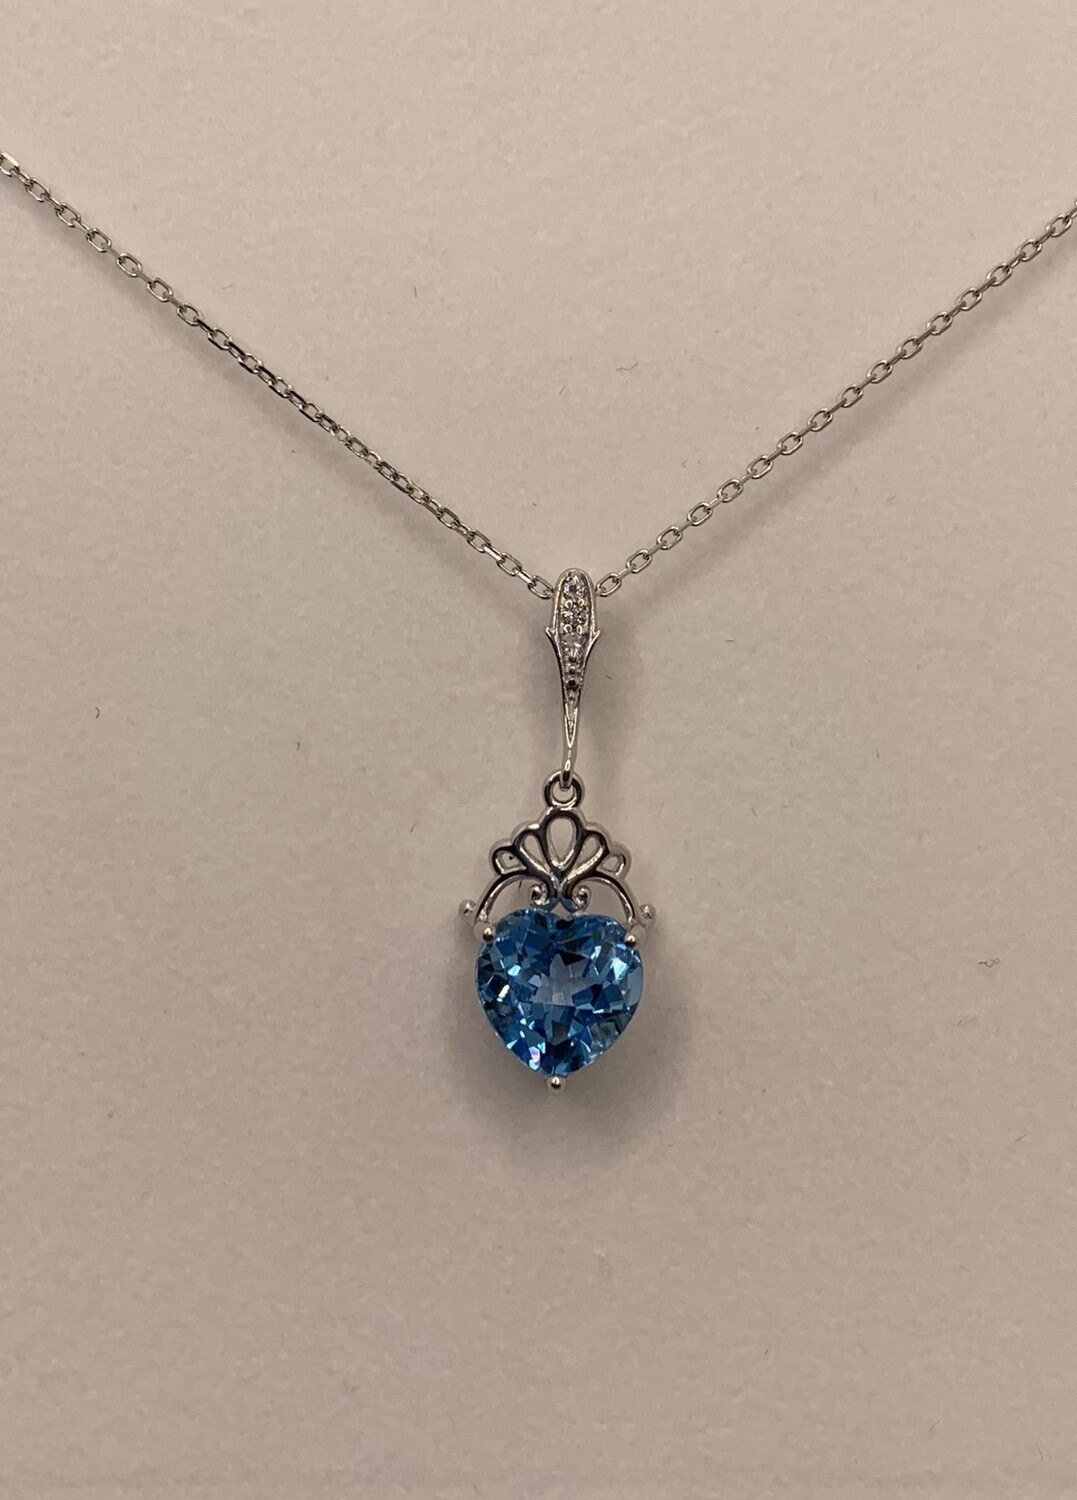 Heart Shaped Light Blue Synthetic Birthstone With Diamond Accents Necklace